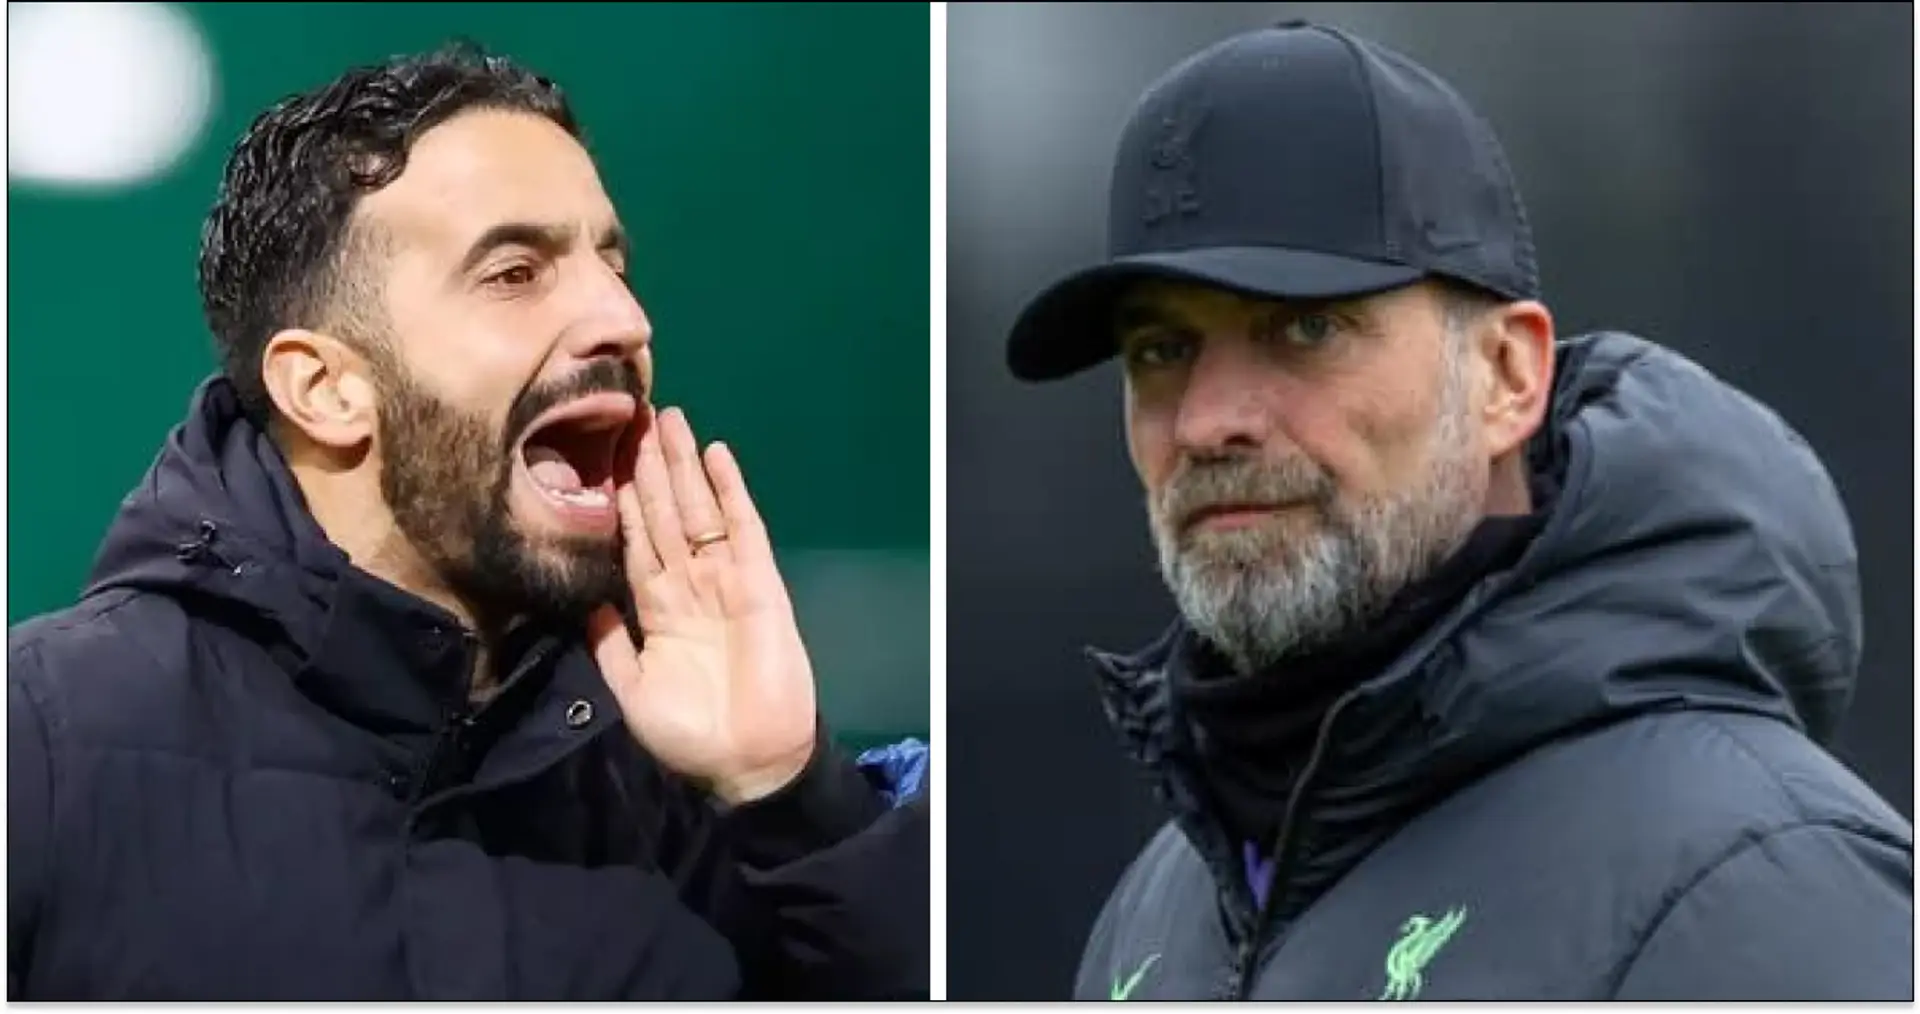 Revealed: What Liverpool players think of Amorim as Klopp successor